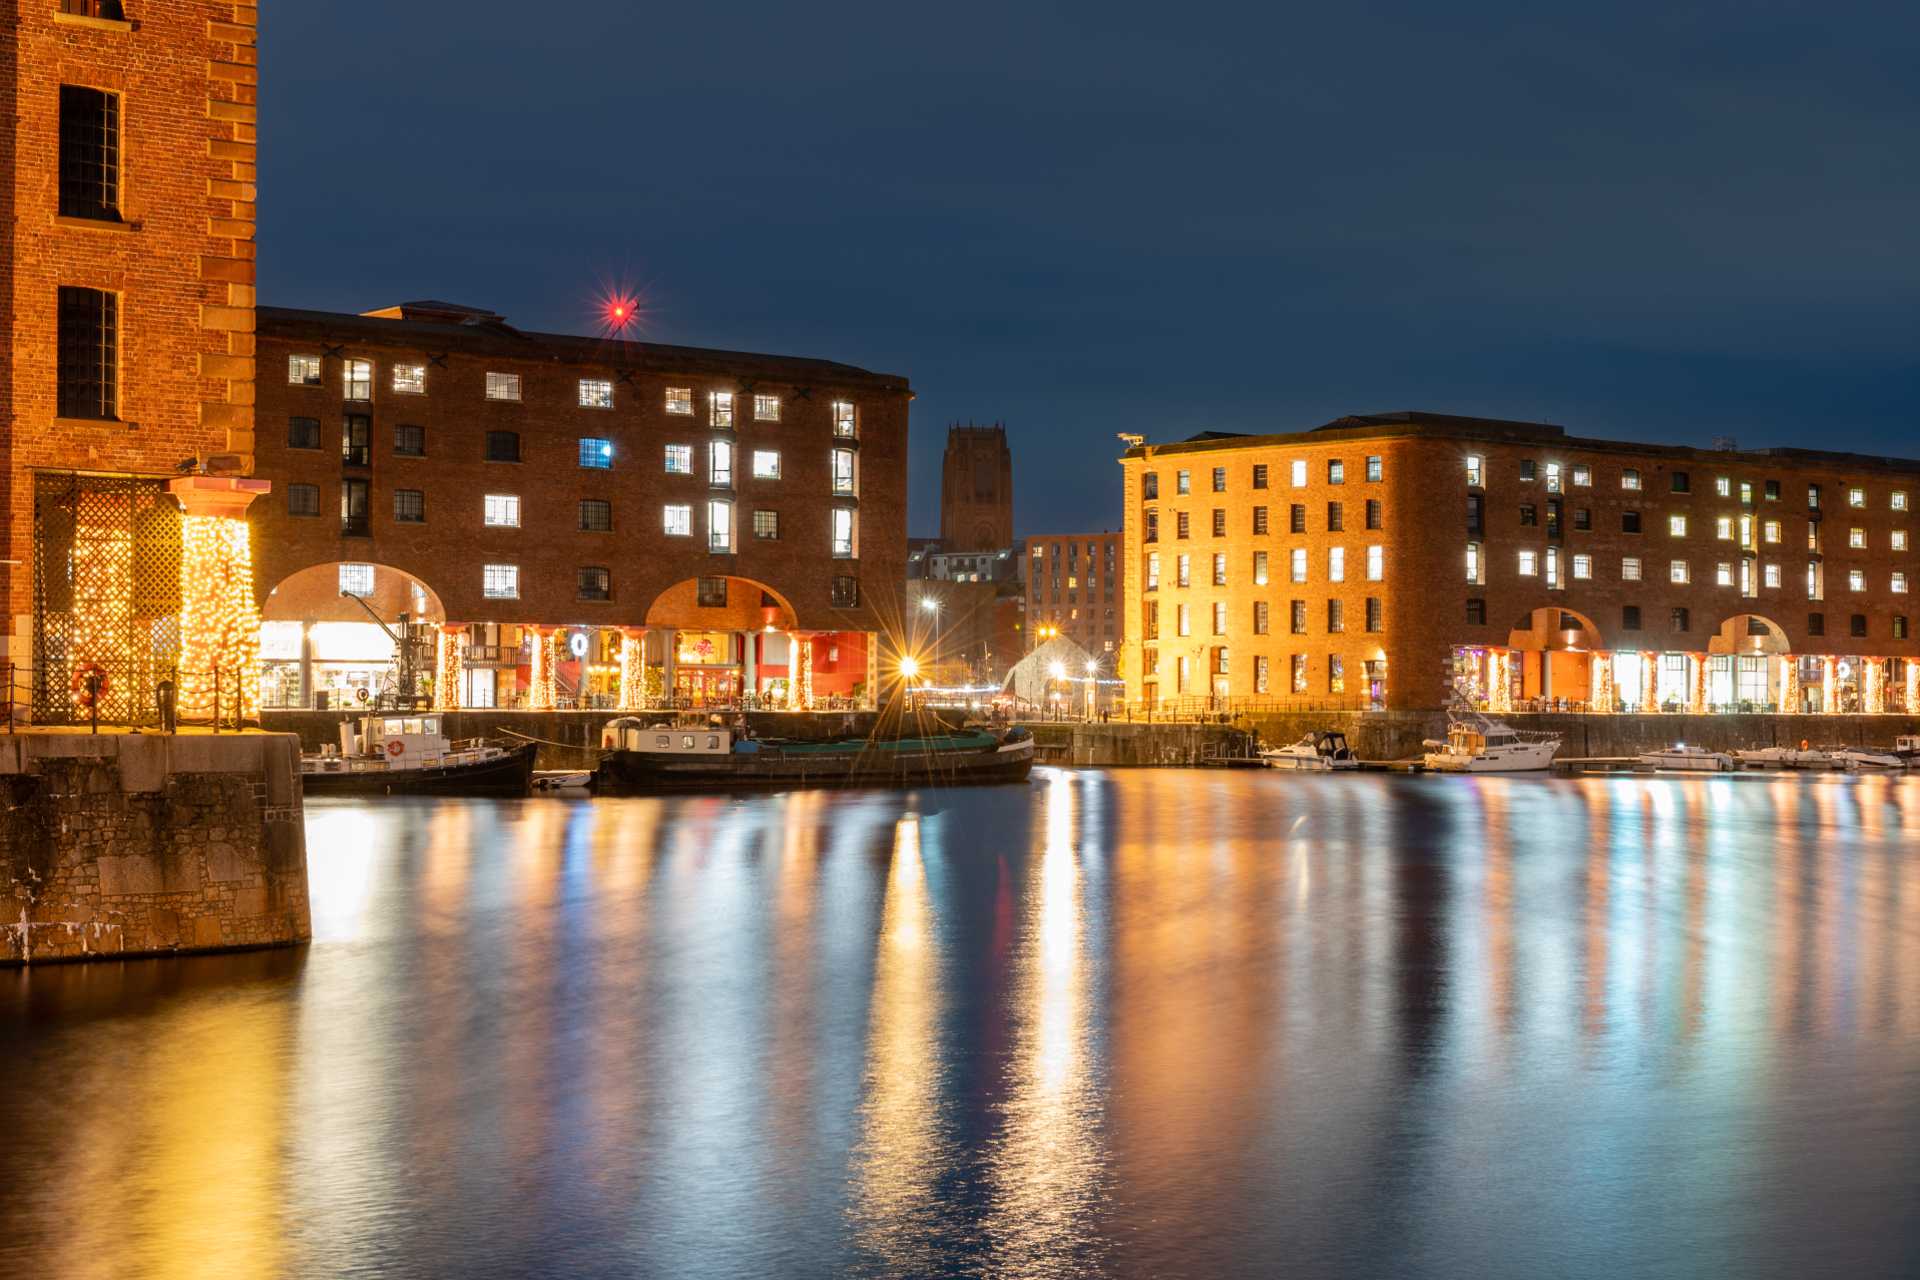 A view of the Albert Dock waterfront in the evening, with lights reflecting on the water.